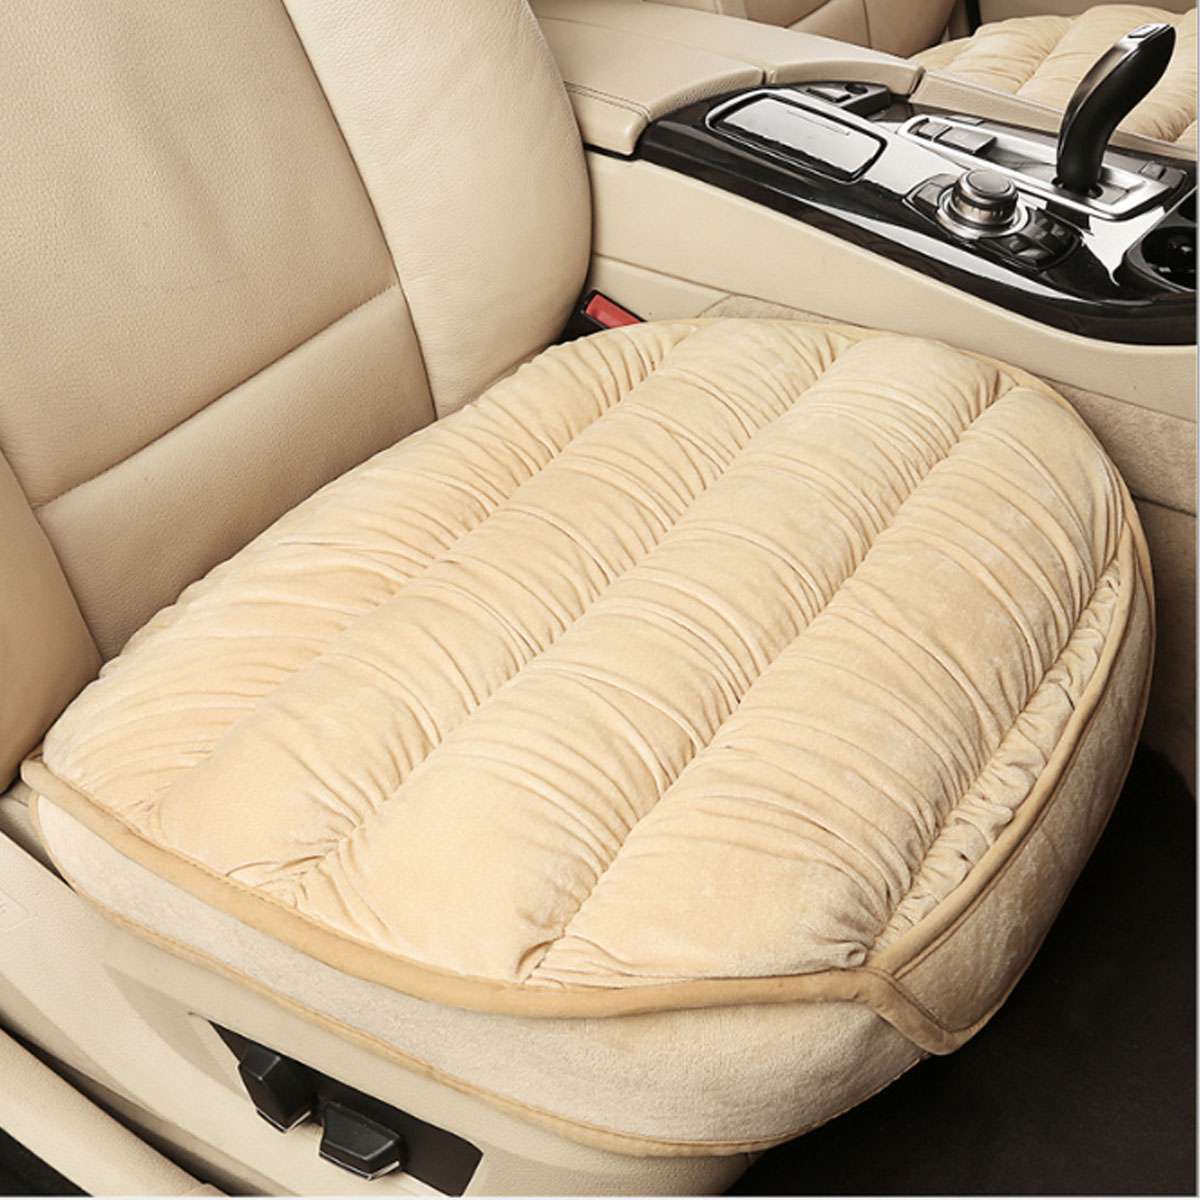 Universal-Car-Front-Seat-Cover-Soft-Plush-Breathable-Pads-Winter-Chair-Cushion-1628307-4